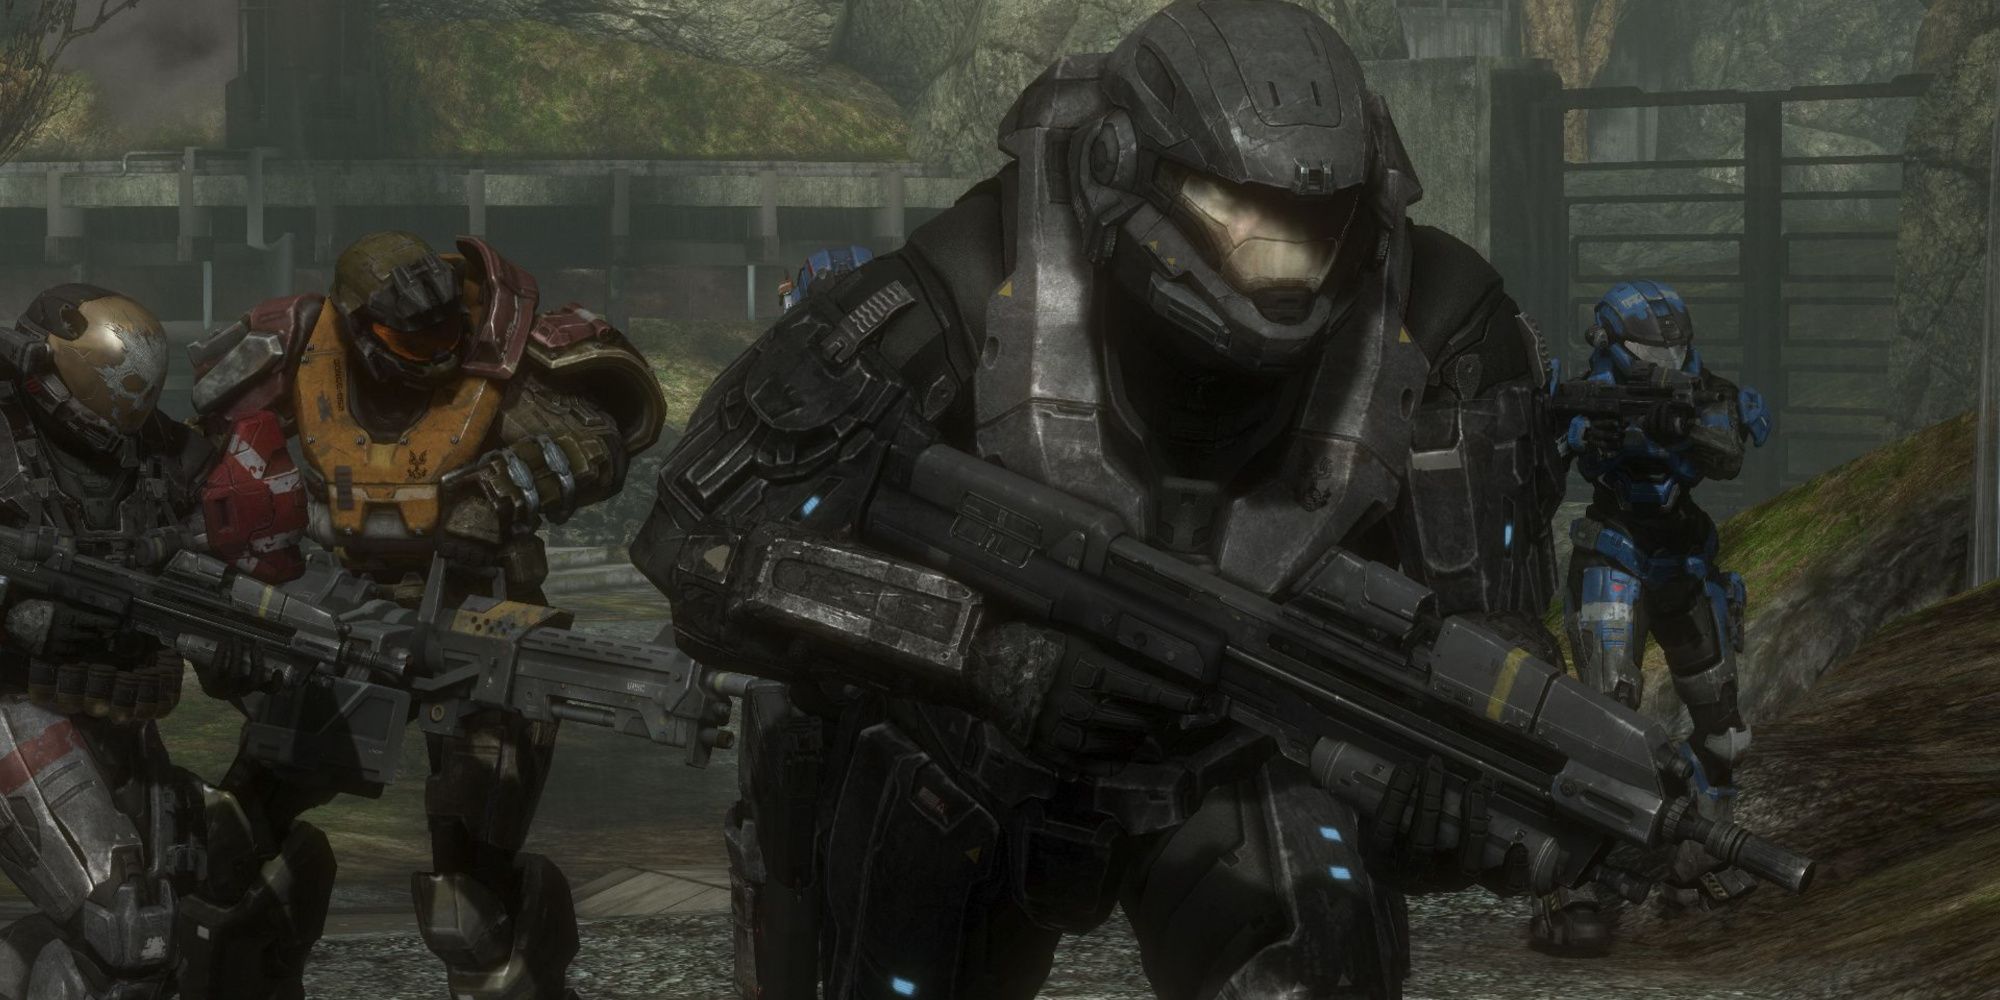 A scene featuring characters in Halo Reach